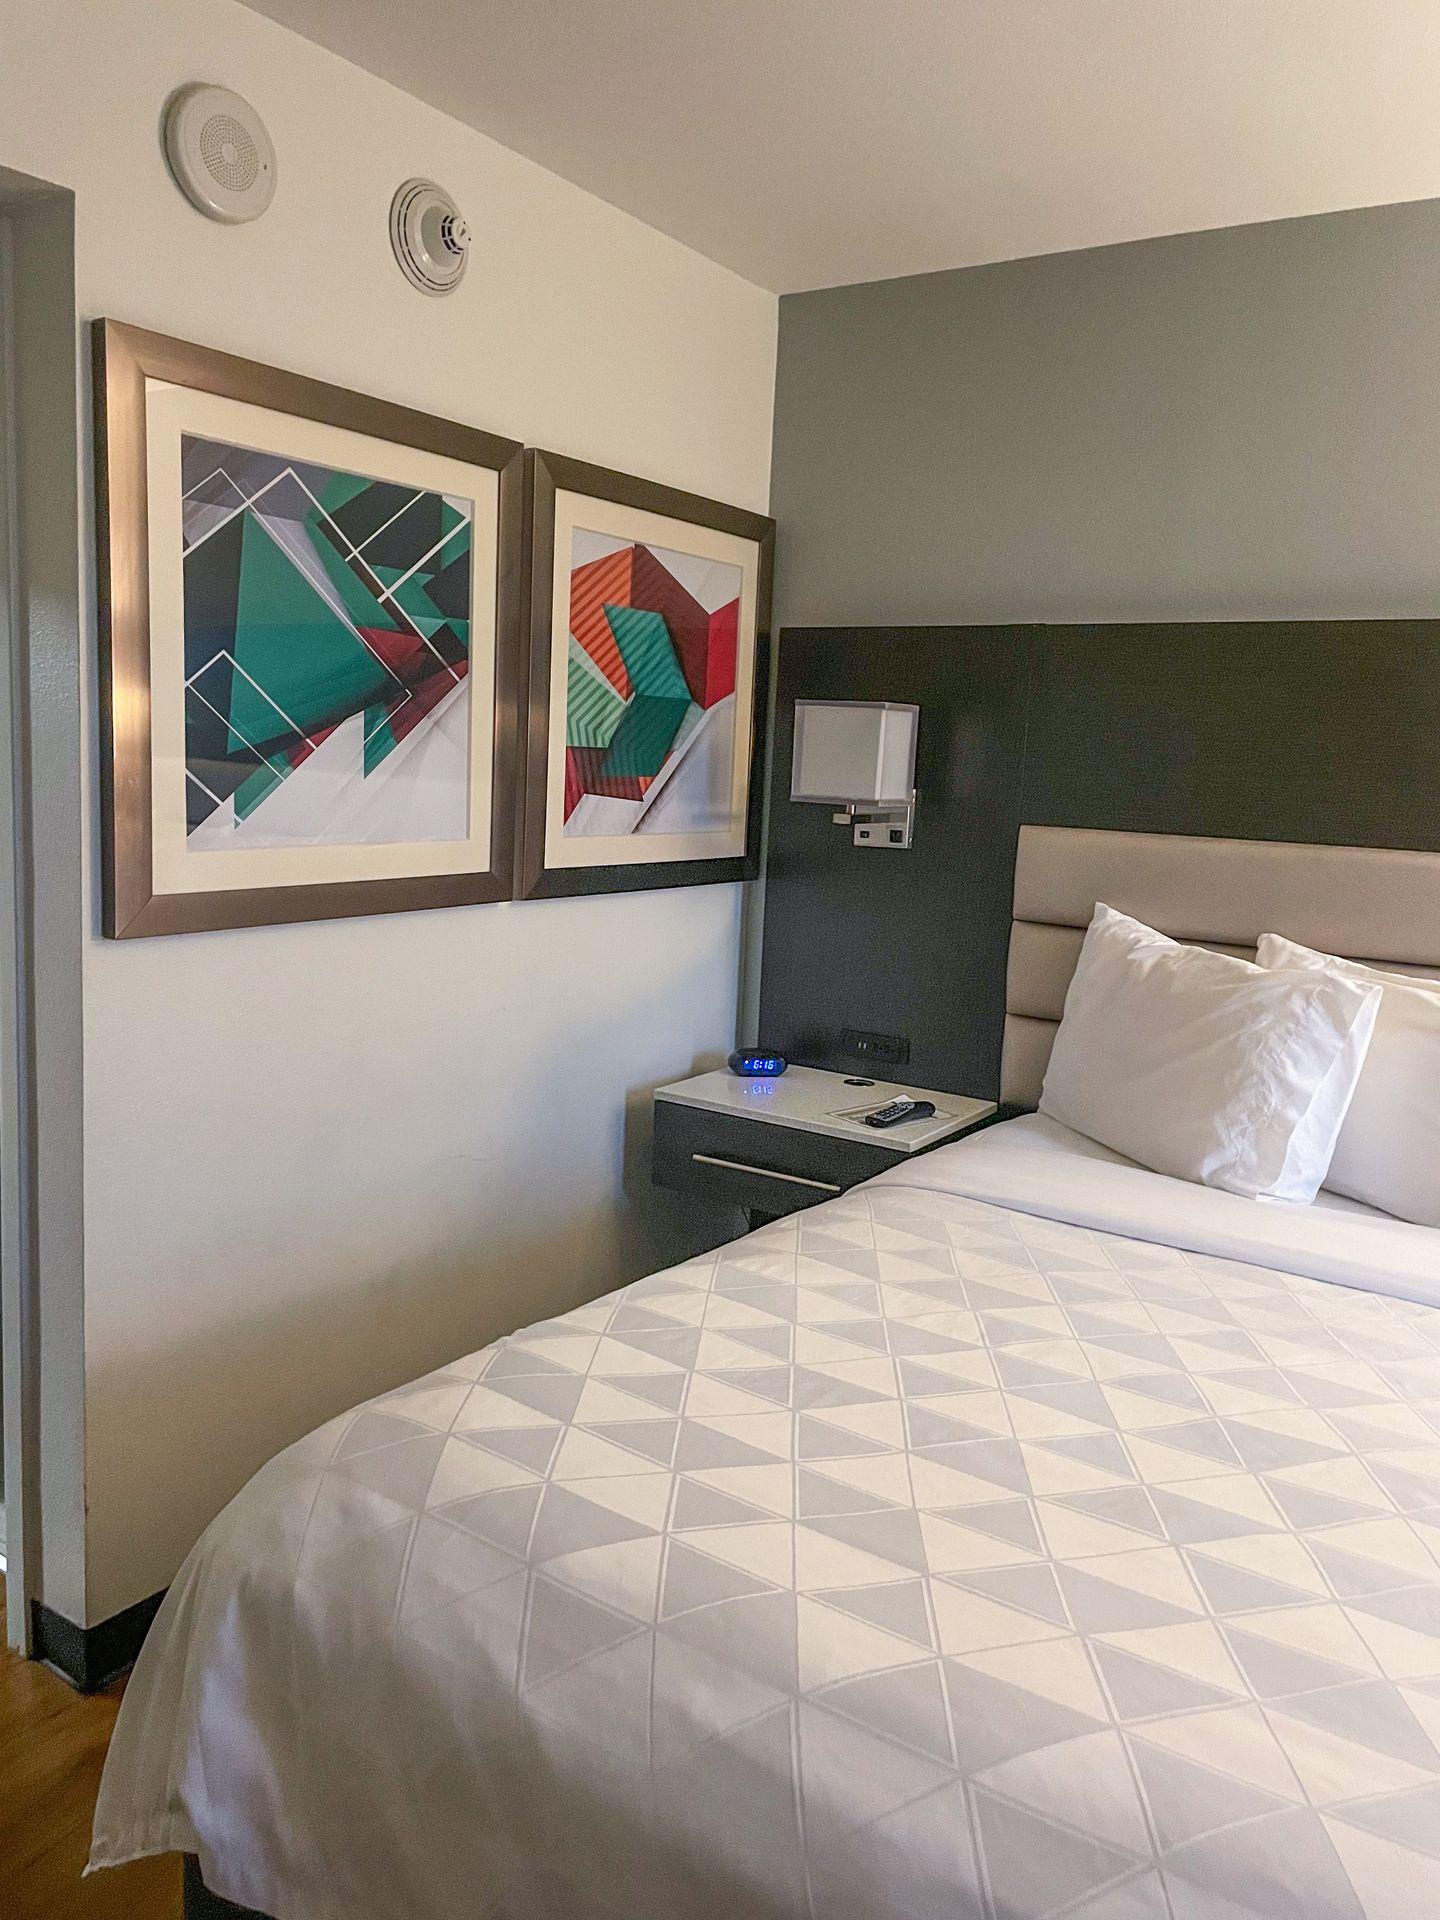 A bed with artwork on the wall next to it inside Holiday Inn Beaumont Plaza